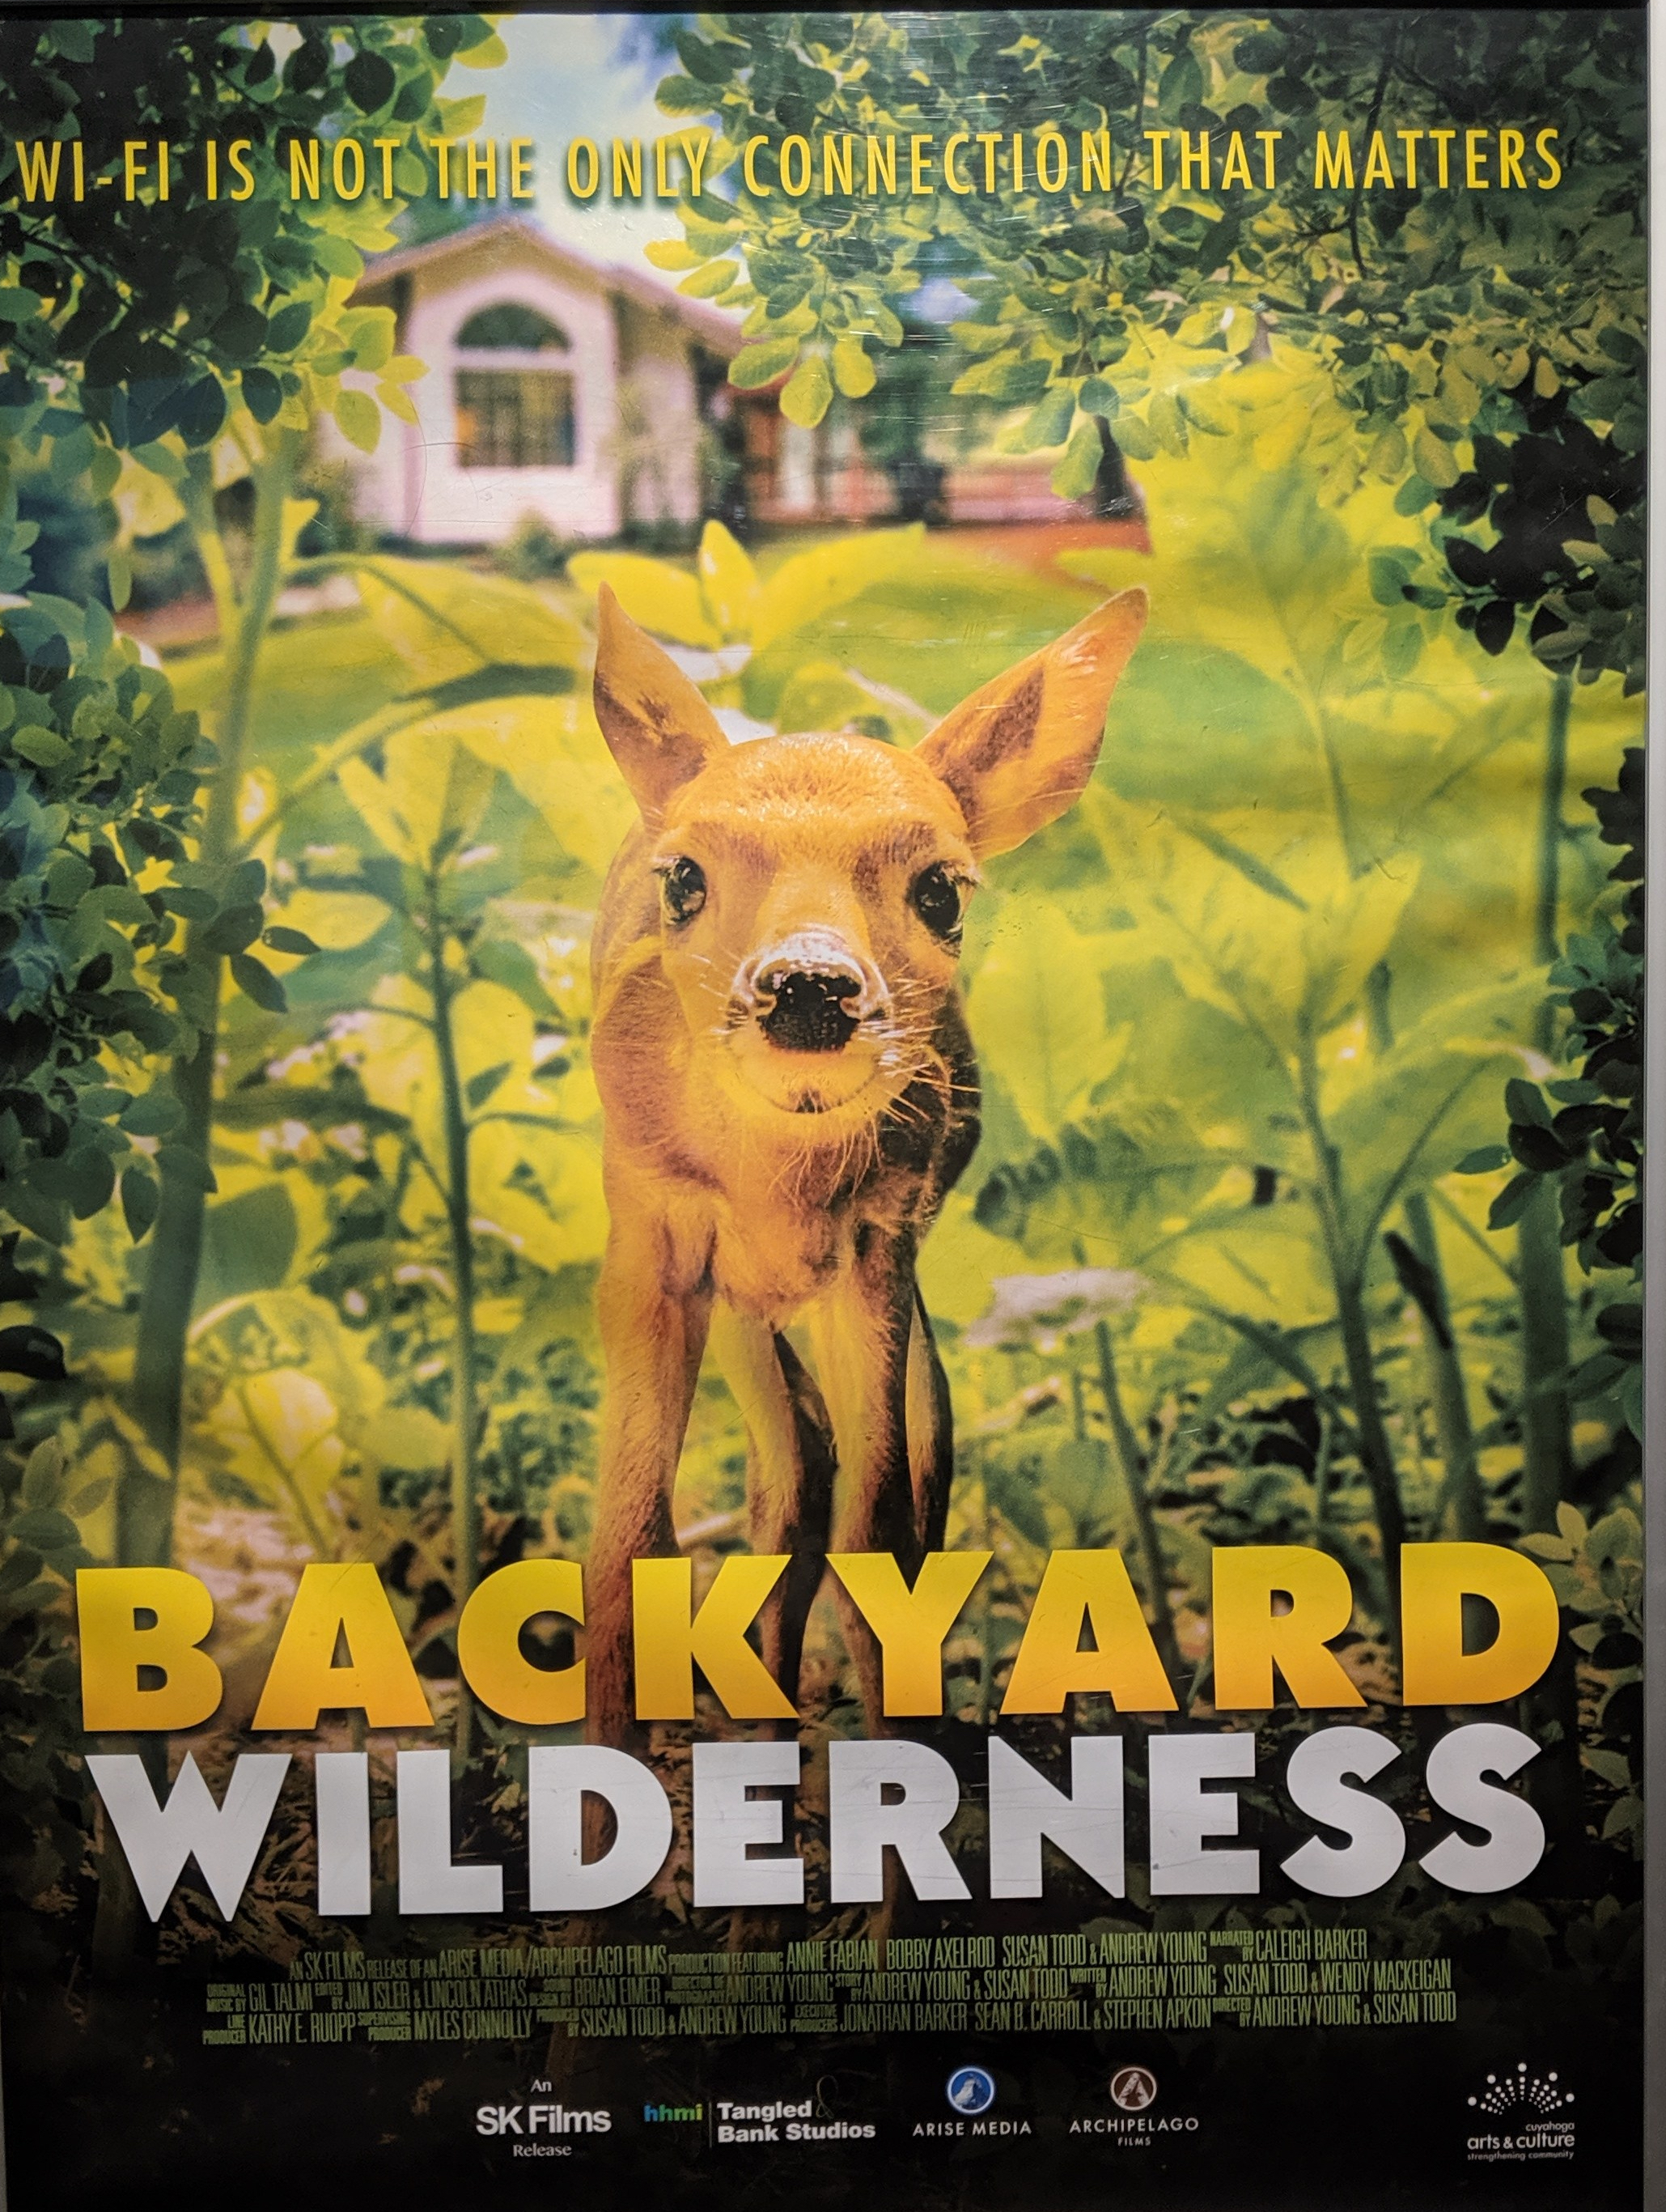 Backyard Wilderness at the Great Lakes Science Center Helps Us See What We Are All Missing